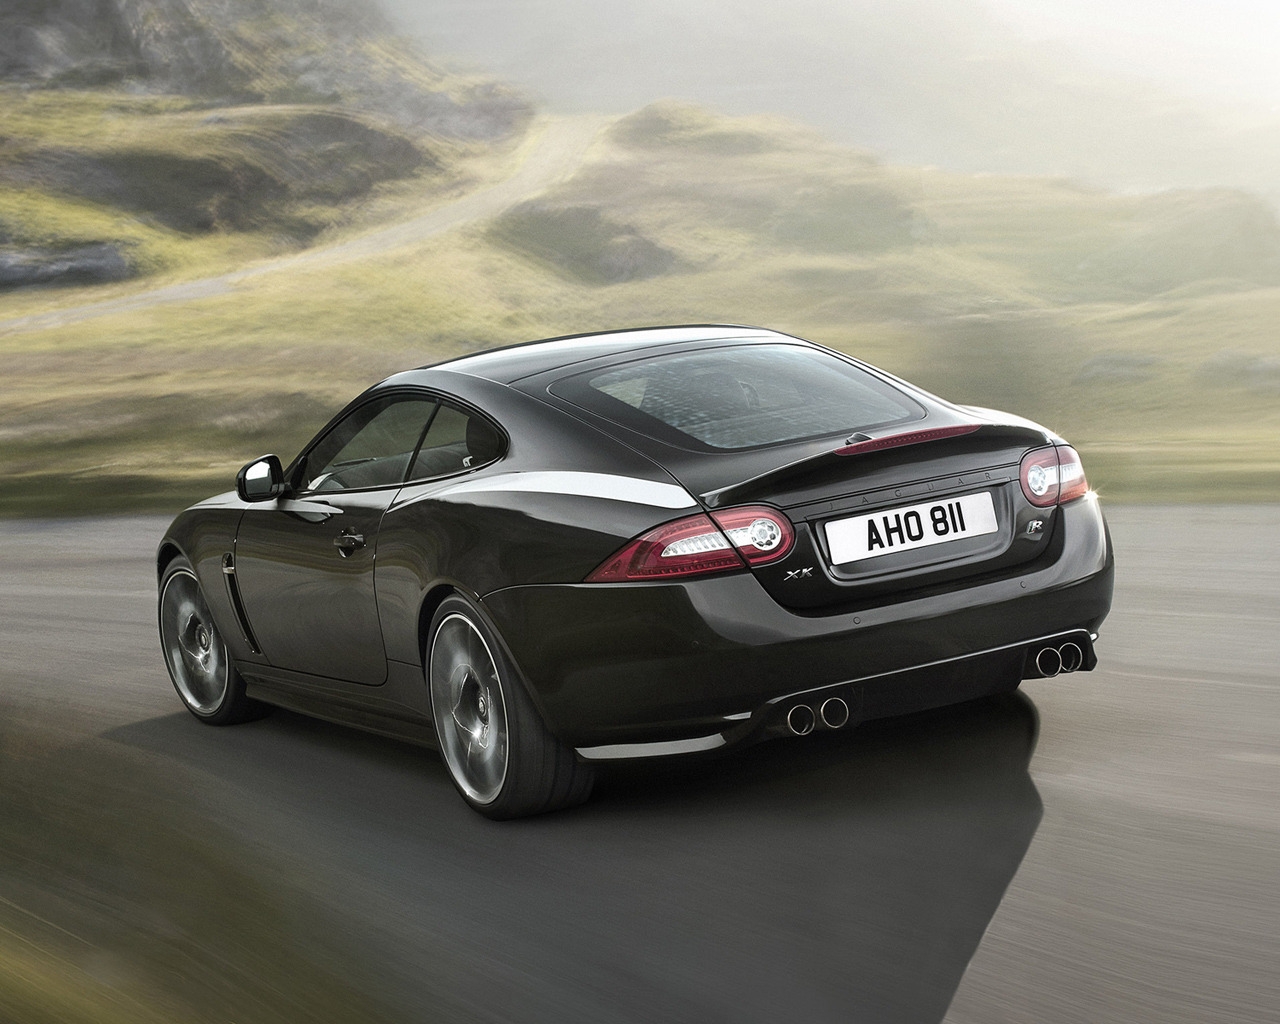 Jaguar XKR Coupe 2010 for 1280 x 1024 resolution